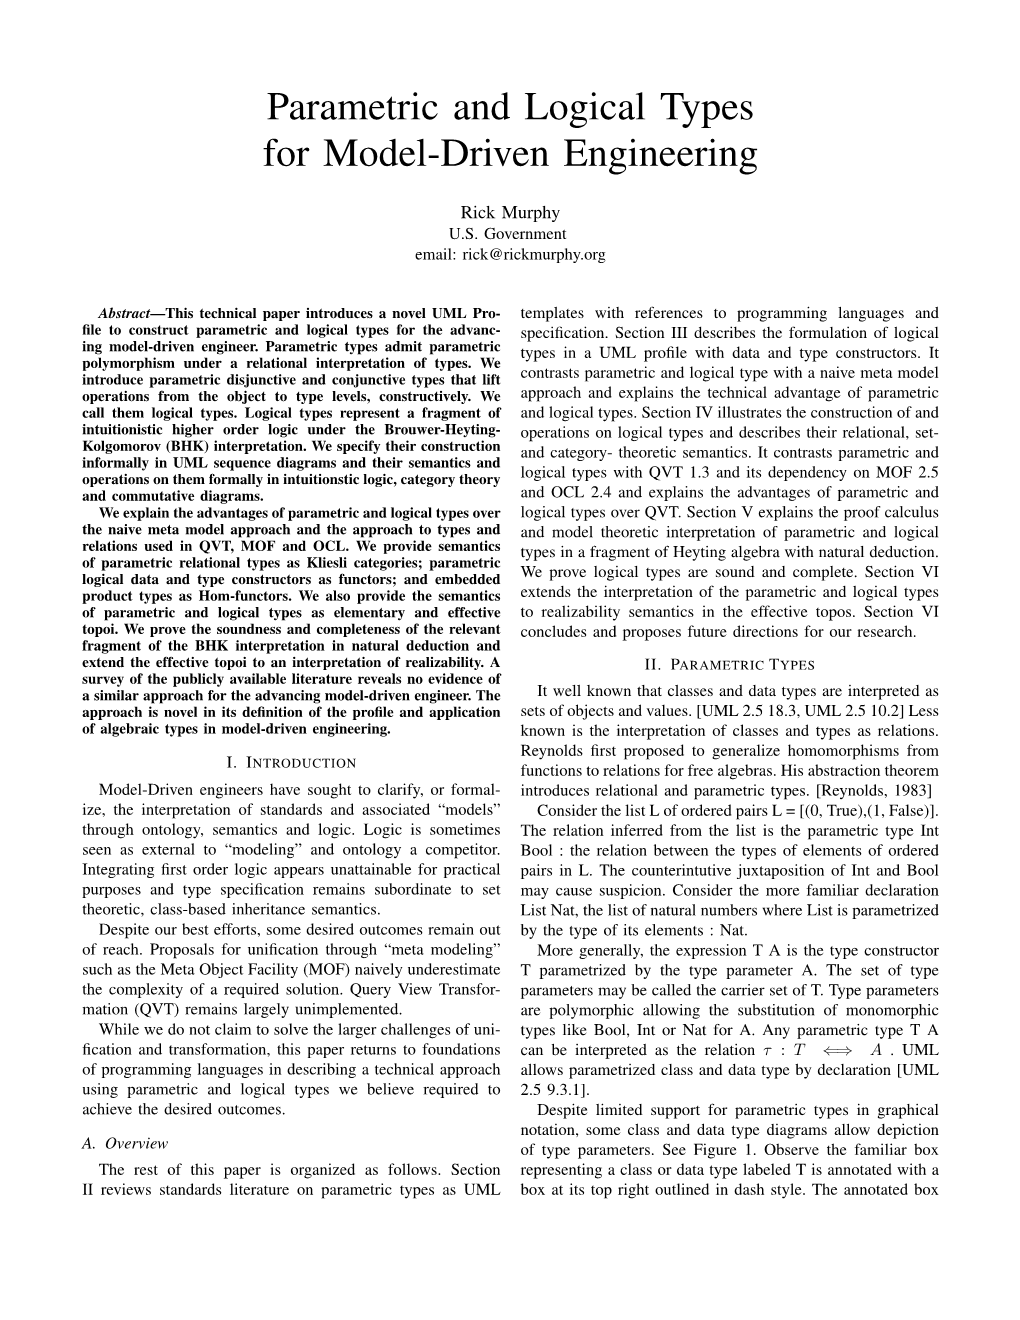 Parametric and Logical Types for Model-Driven Engineering